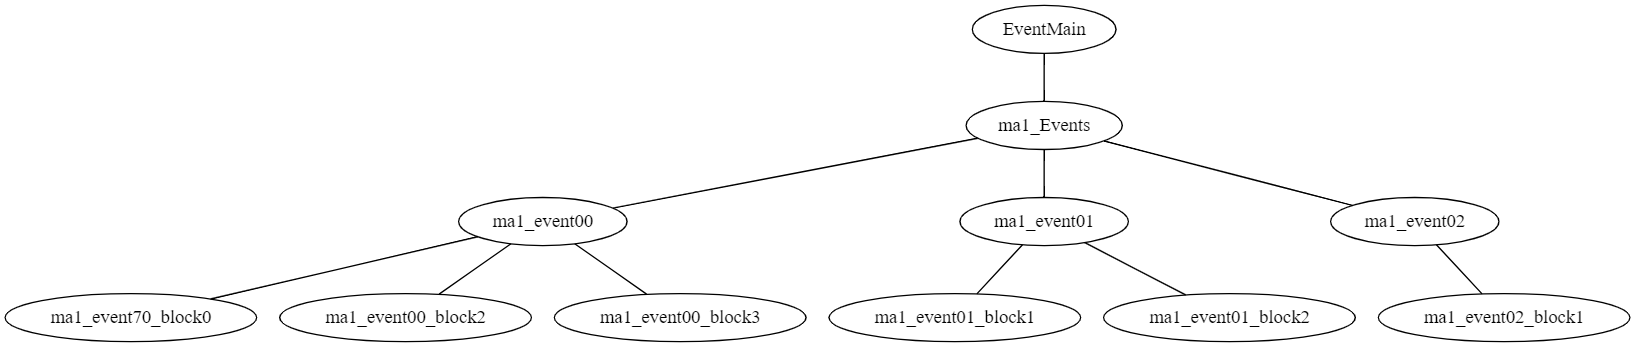 Example of the hierarchy of event blocks